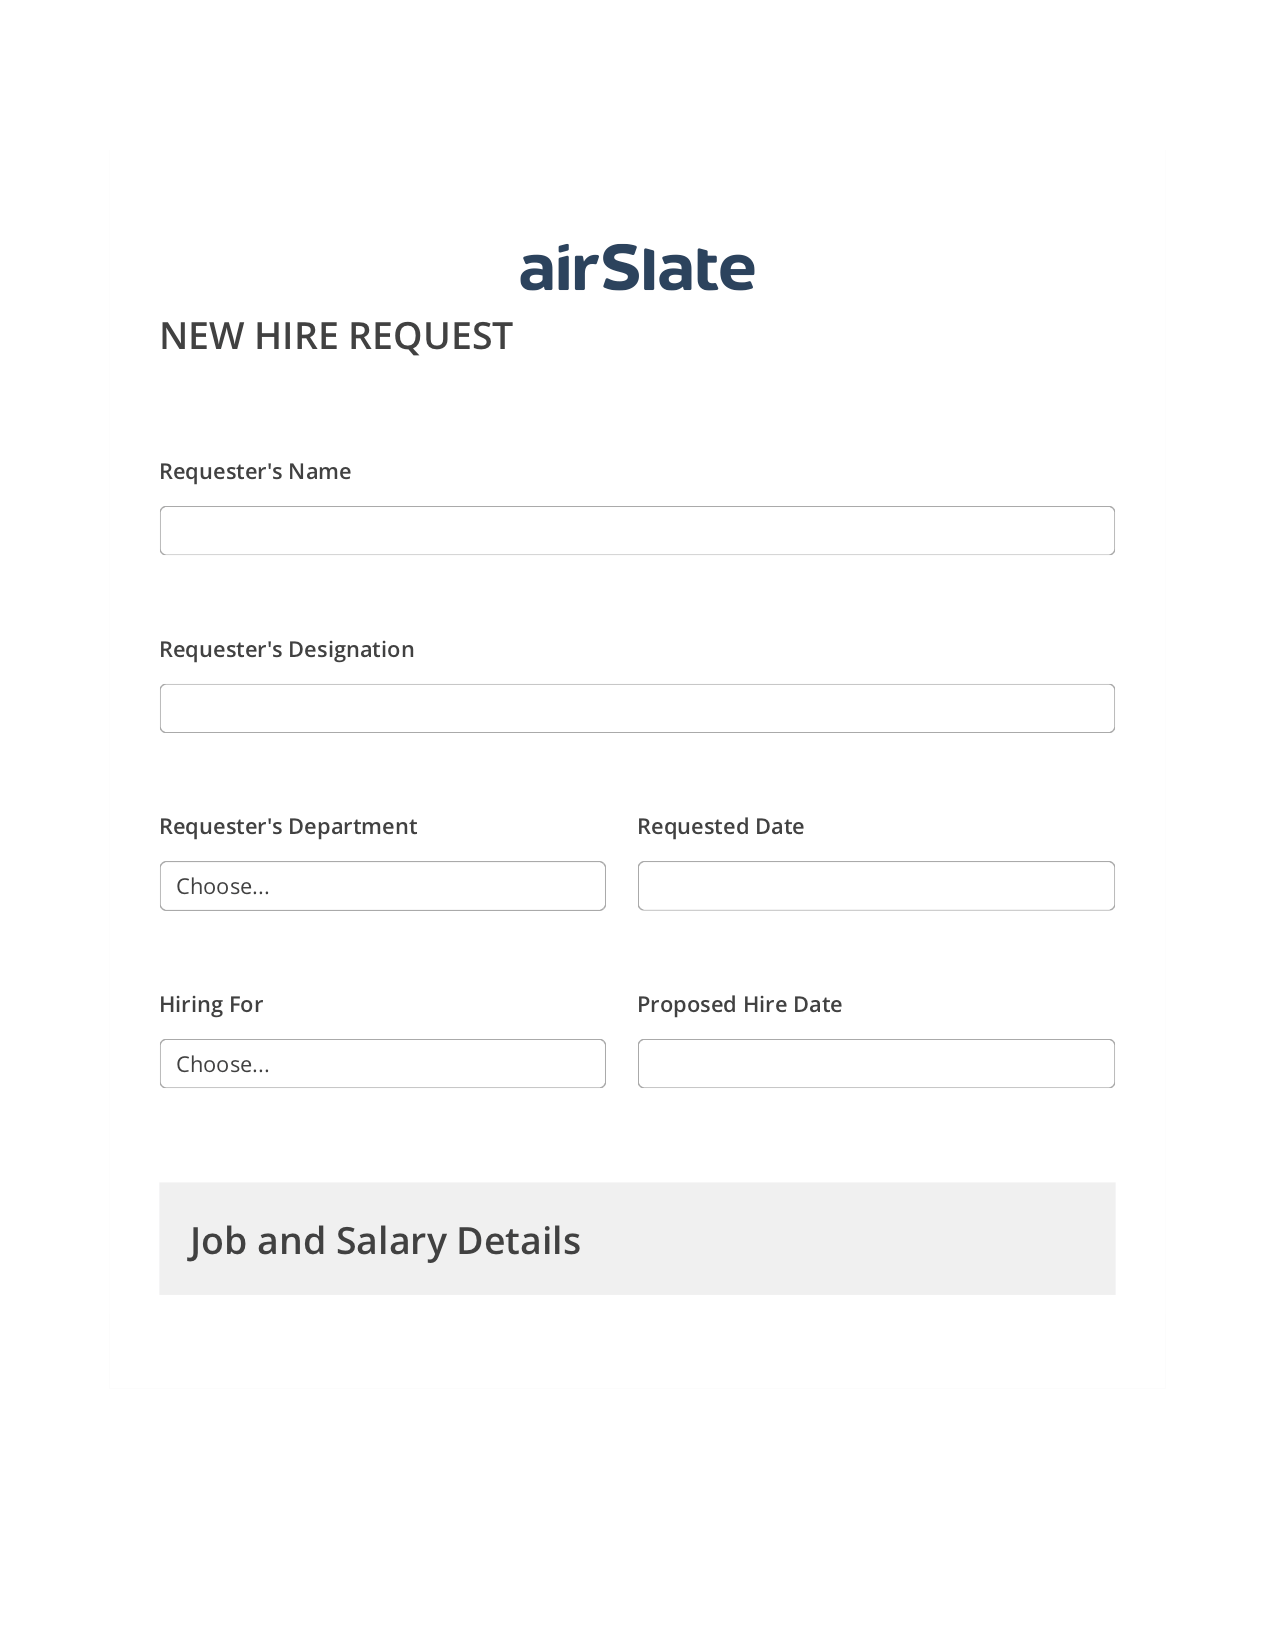 Hiring Request Workflow Pre-fill from another Slate Bot, Send a Slate to Salesforce Contact Bot, Export to WebMerge Bot